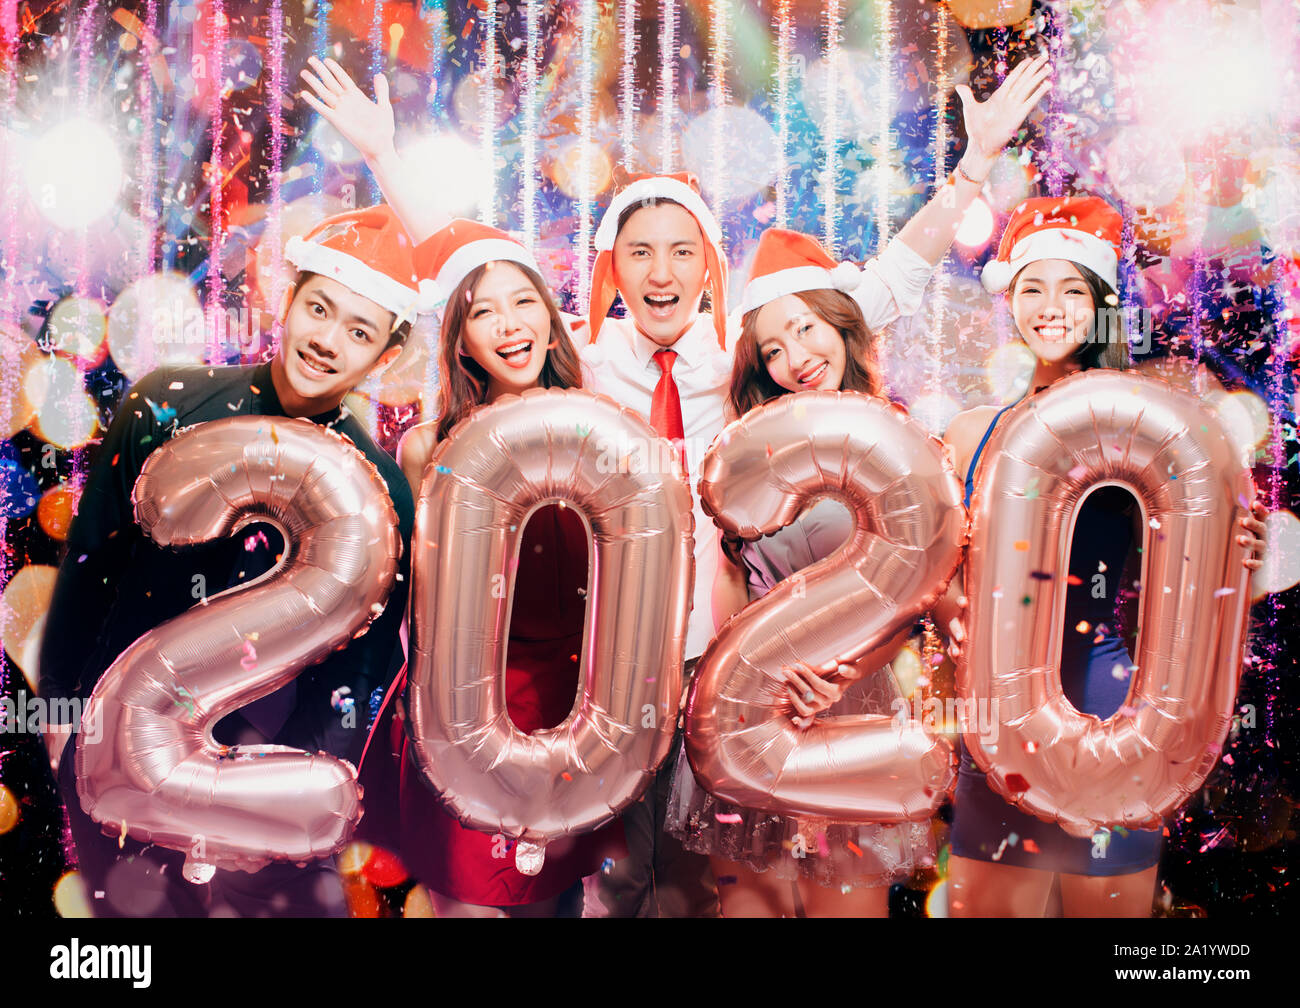 christmas party 2020 Young Group Celebrating New Yew 2020 In Christmas Party Stock Photo Alamy christmas party 2020